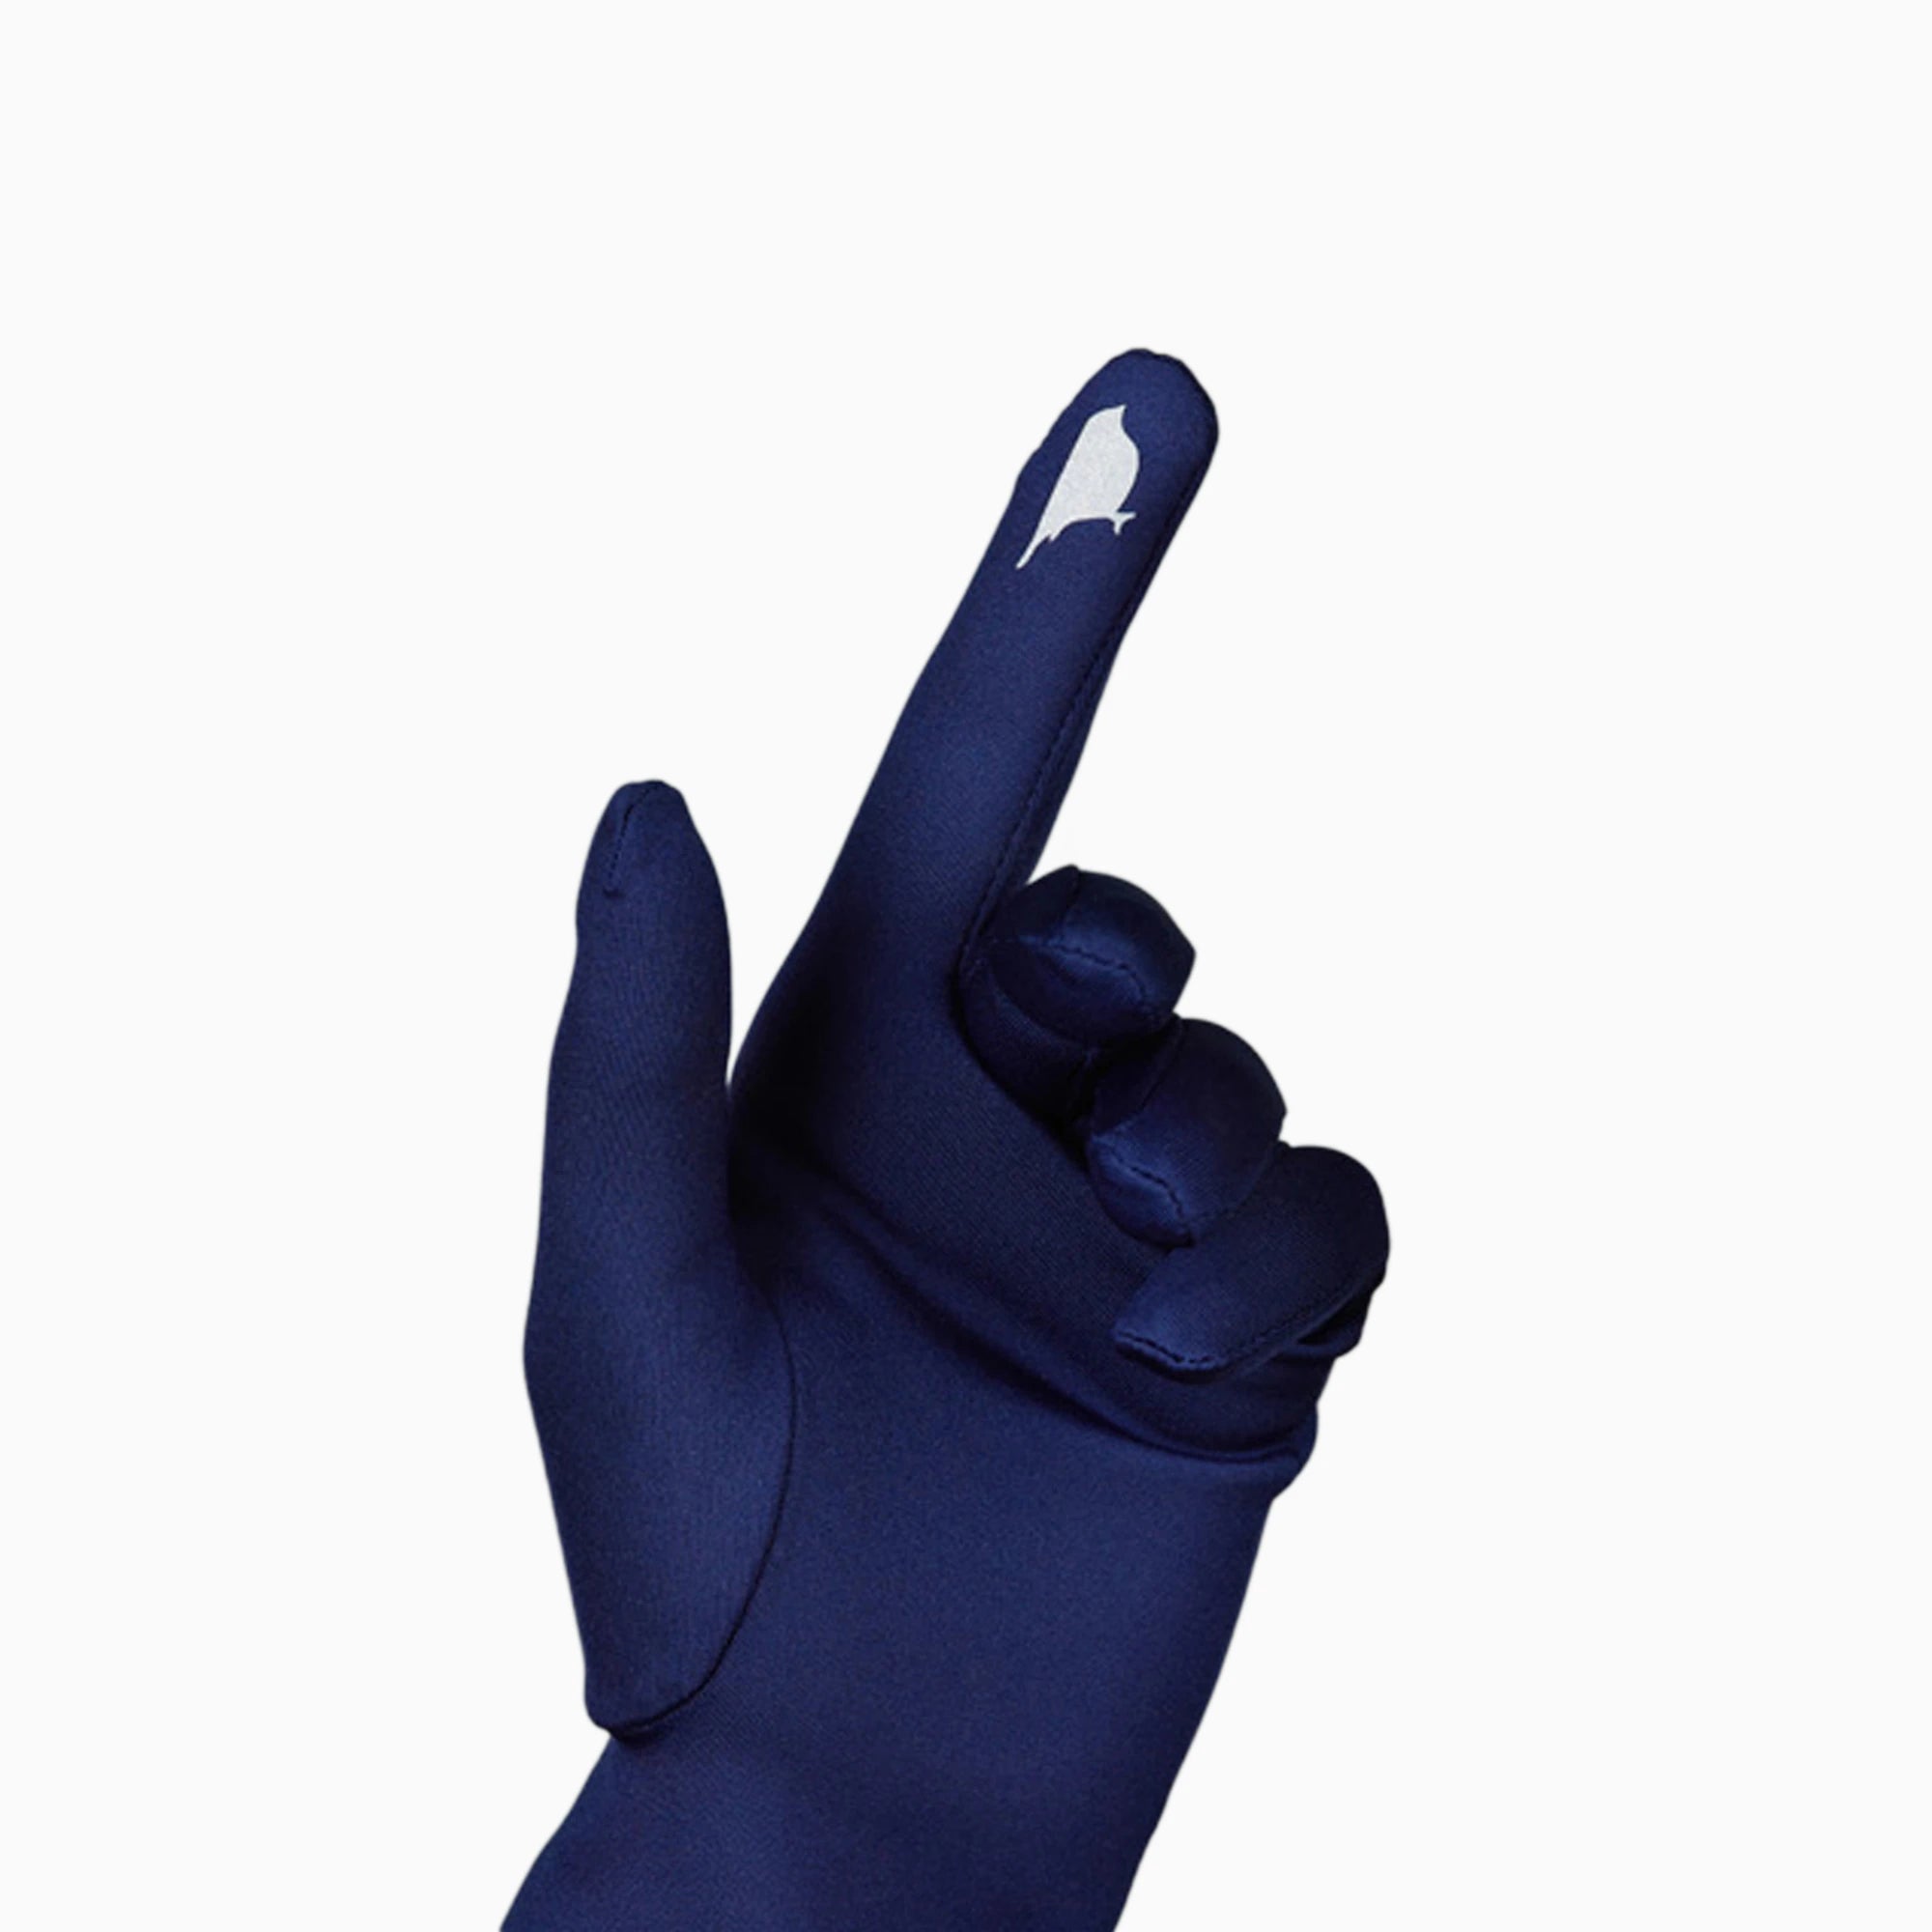 Touchscreen gloves in dark blue with a touch screen compatible index finger.